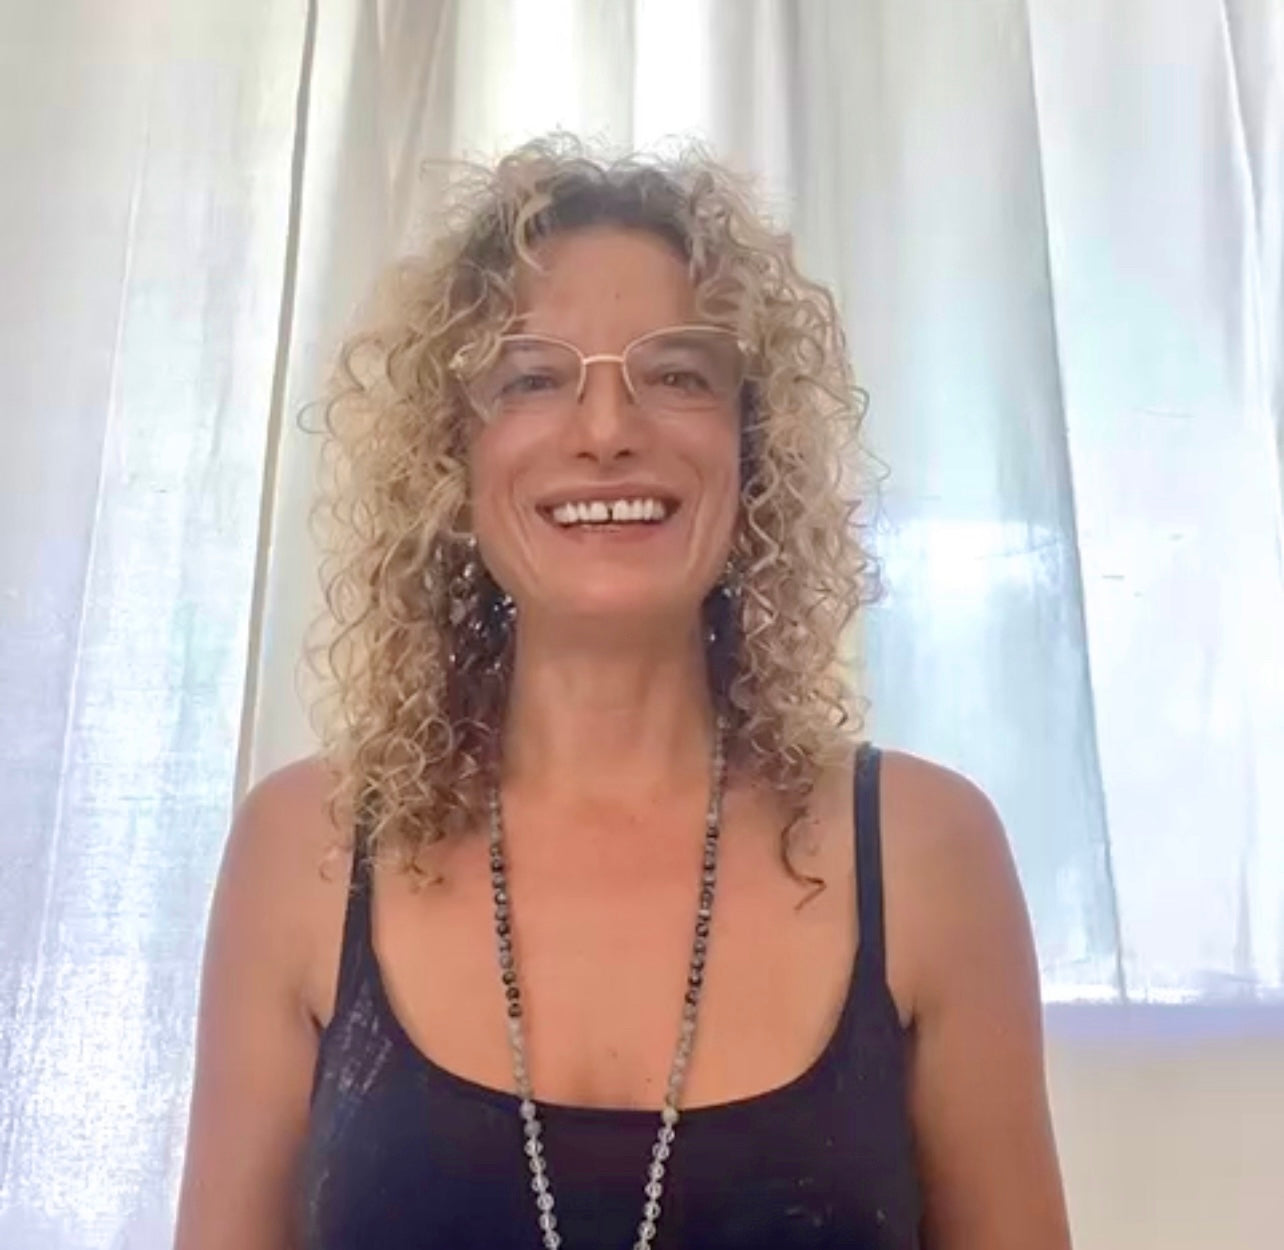 Load video: Cassandra - private 1-1 in person retreat - Self Love Magic Mirror Ritual by Emmanuelle Blanc from Unleash Your Inner Wealth